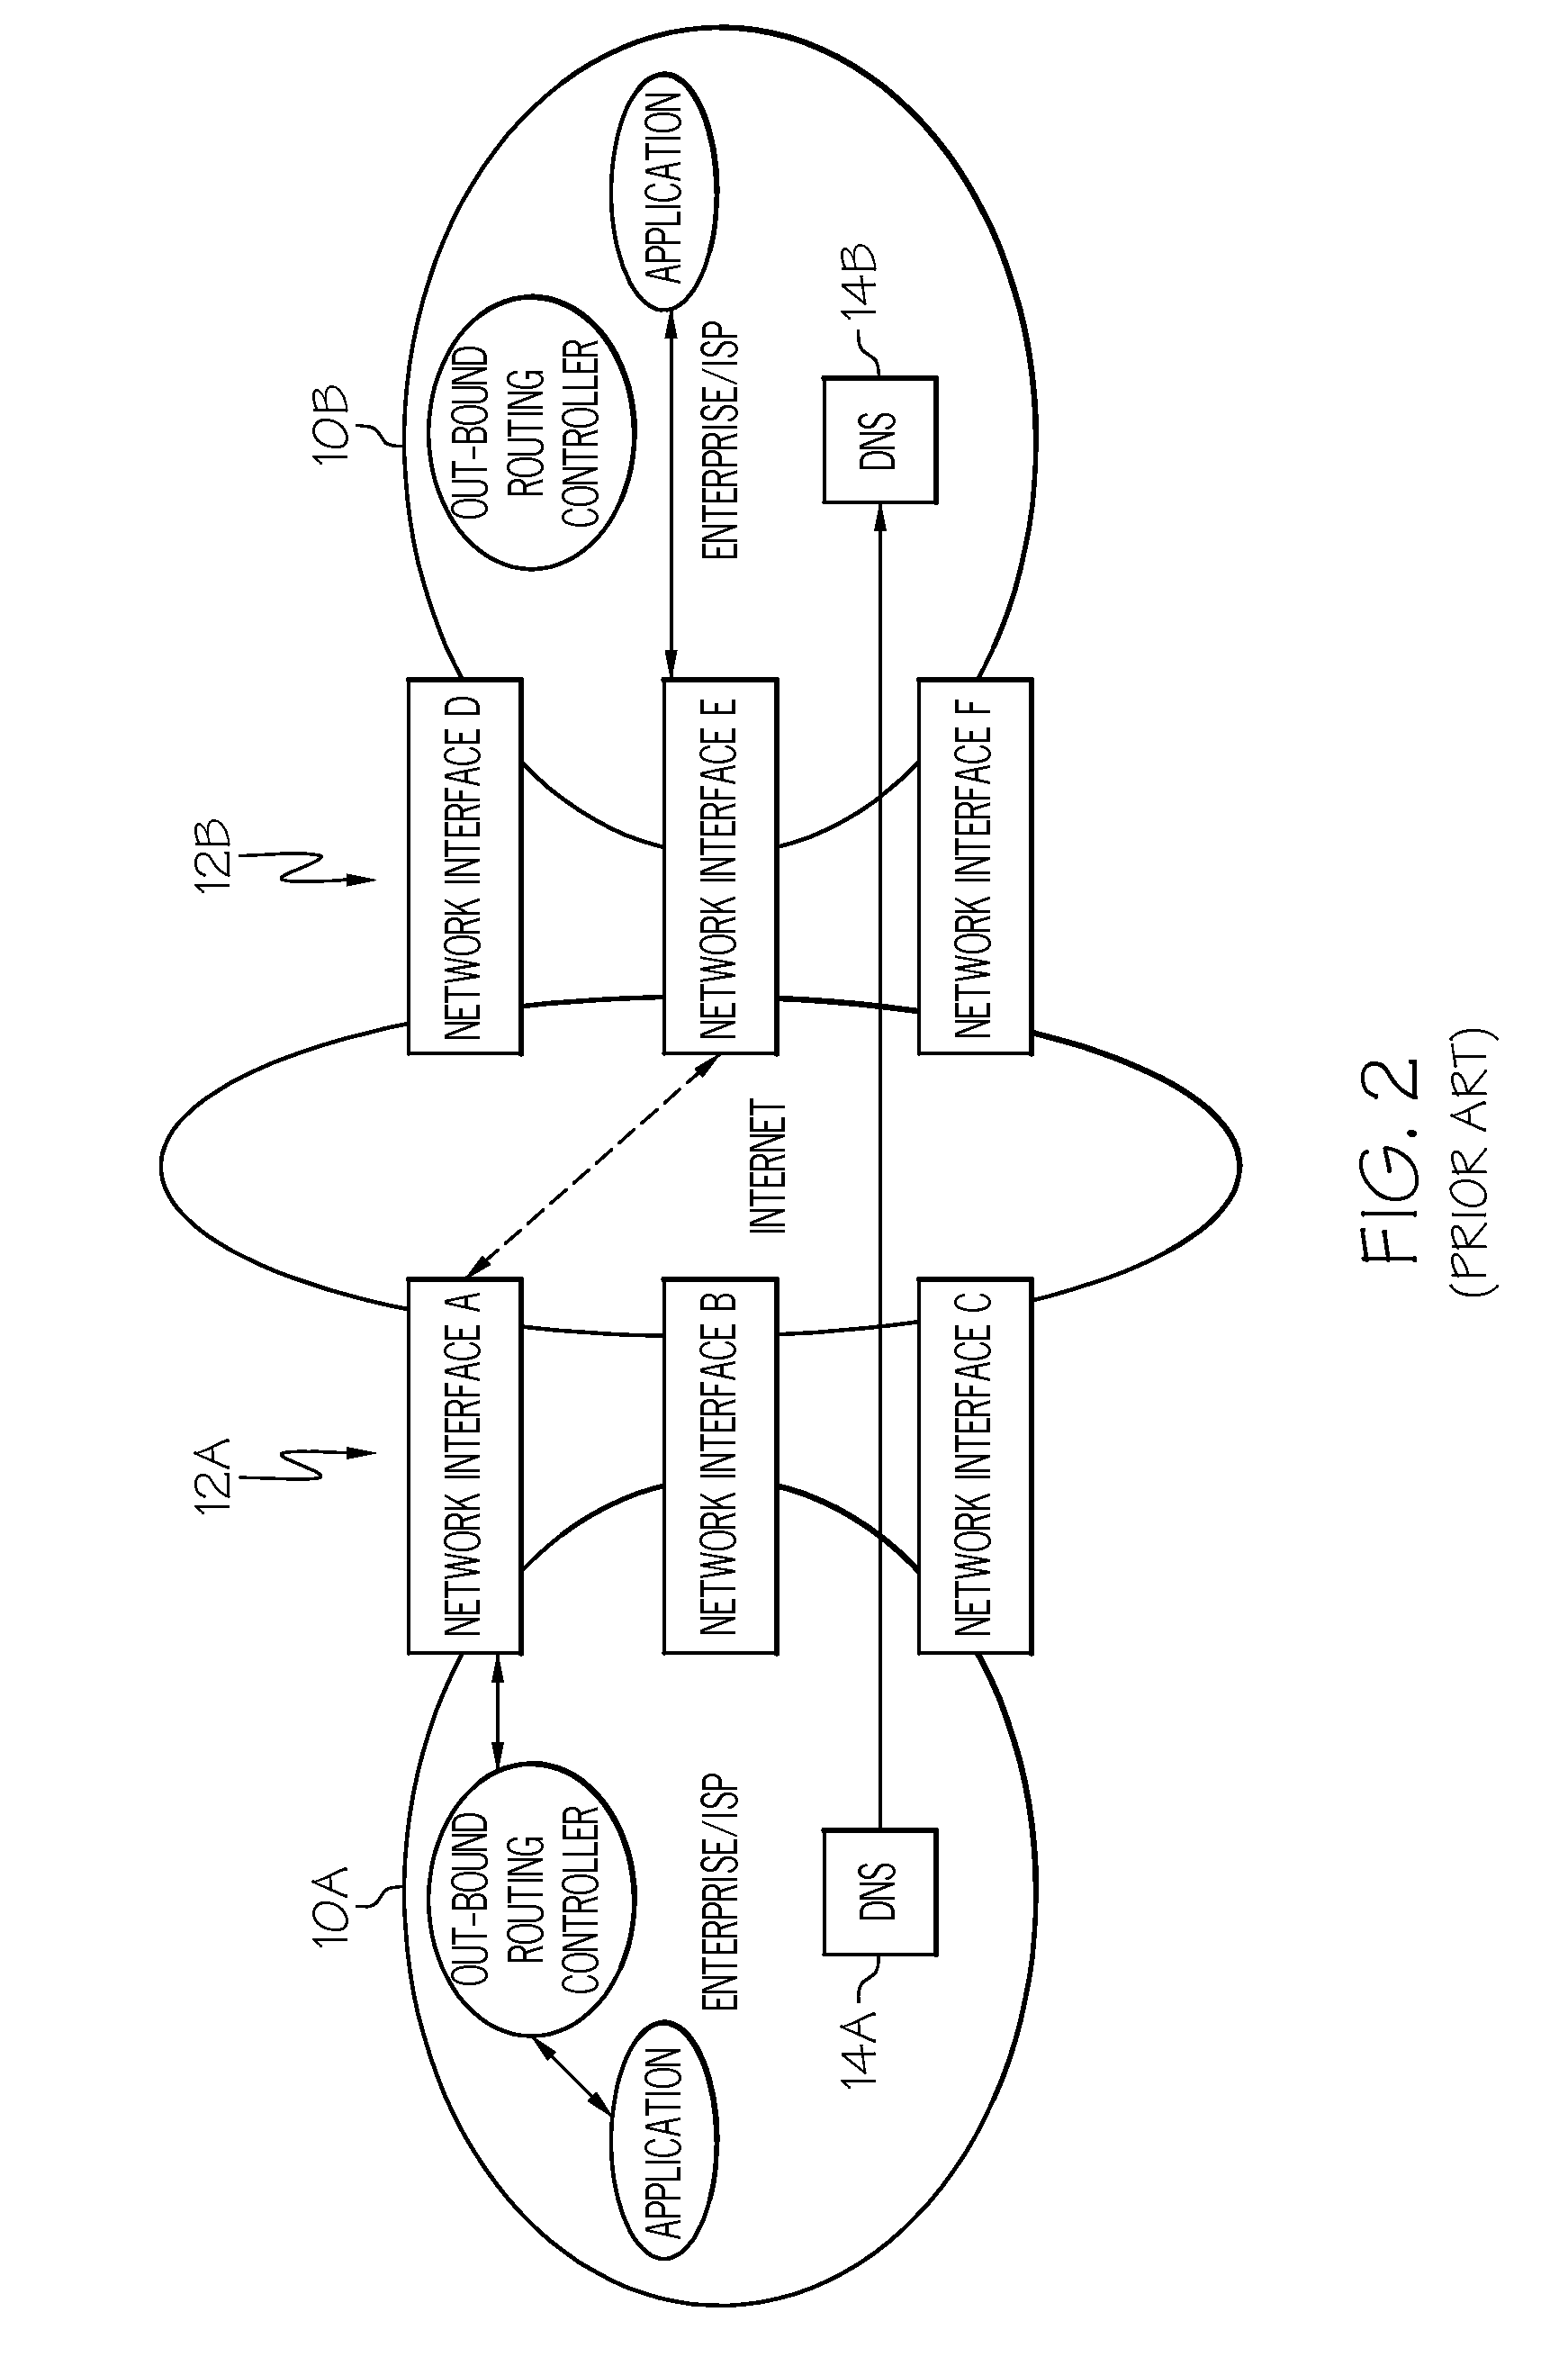 Method, system, and program product for enhancing network communications between endpoints